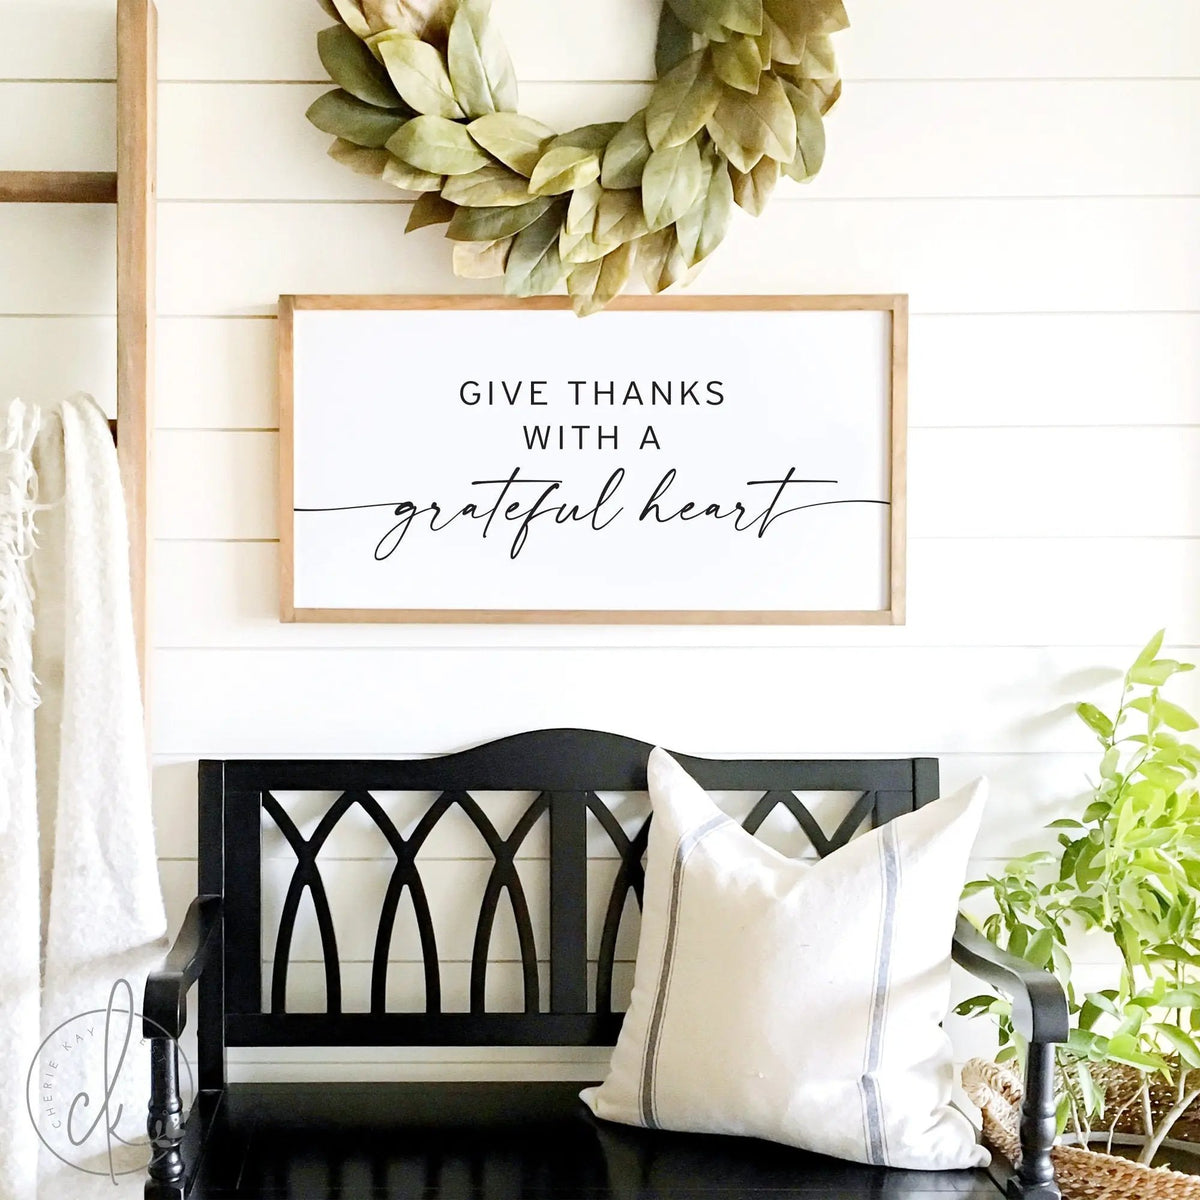 fall sign | give thanks with a grateful heart sign |  fall wall decor | give thanks sign | wood framed sign board| home decor sign